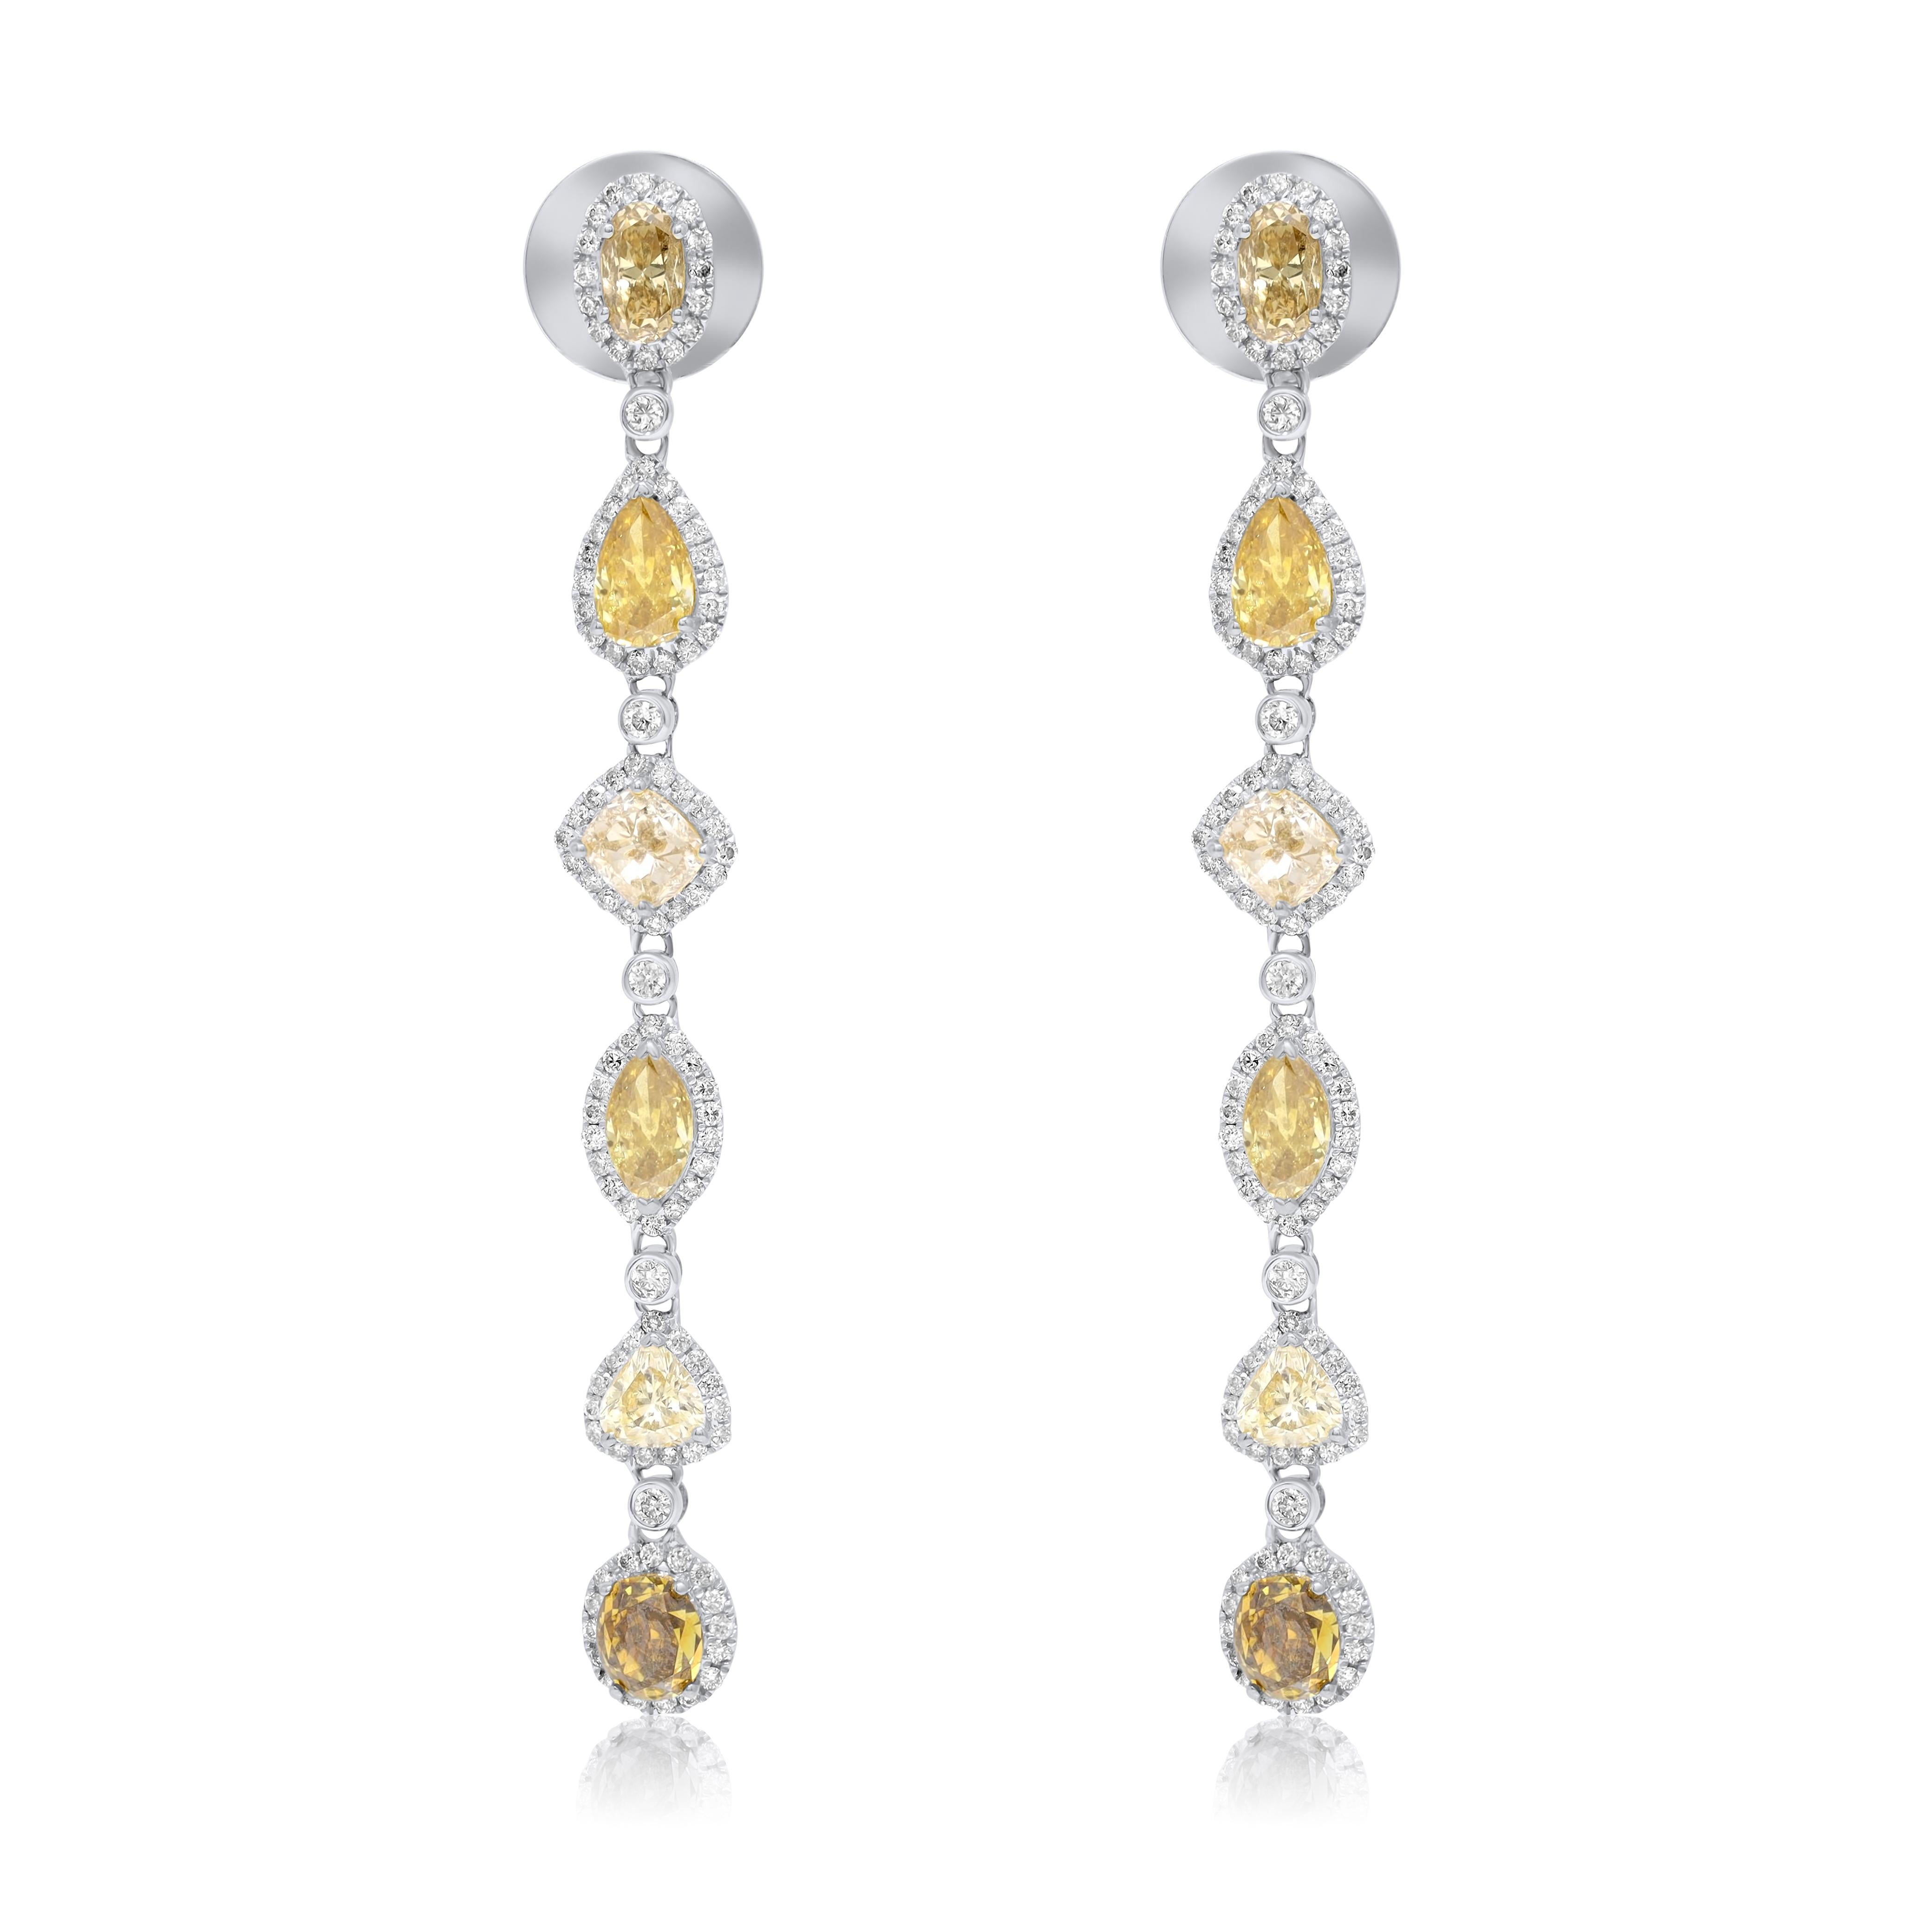 18 kt white gold diamond earrings adorned with 7.30 cts tw of various cut yellow diamonds in a hanging line.
Diana M. is a leading supplier of top-quality fine jewelry for over 35 years.
Diana M is one-stop shop for all your jewelry shopping,